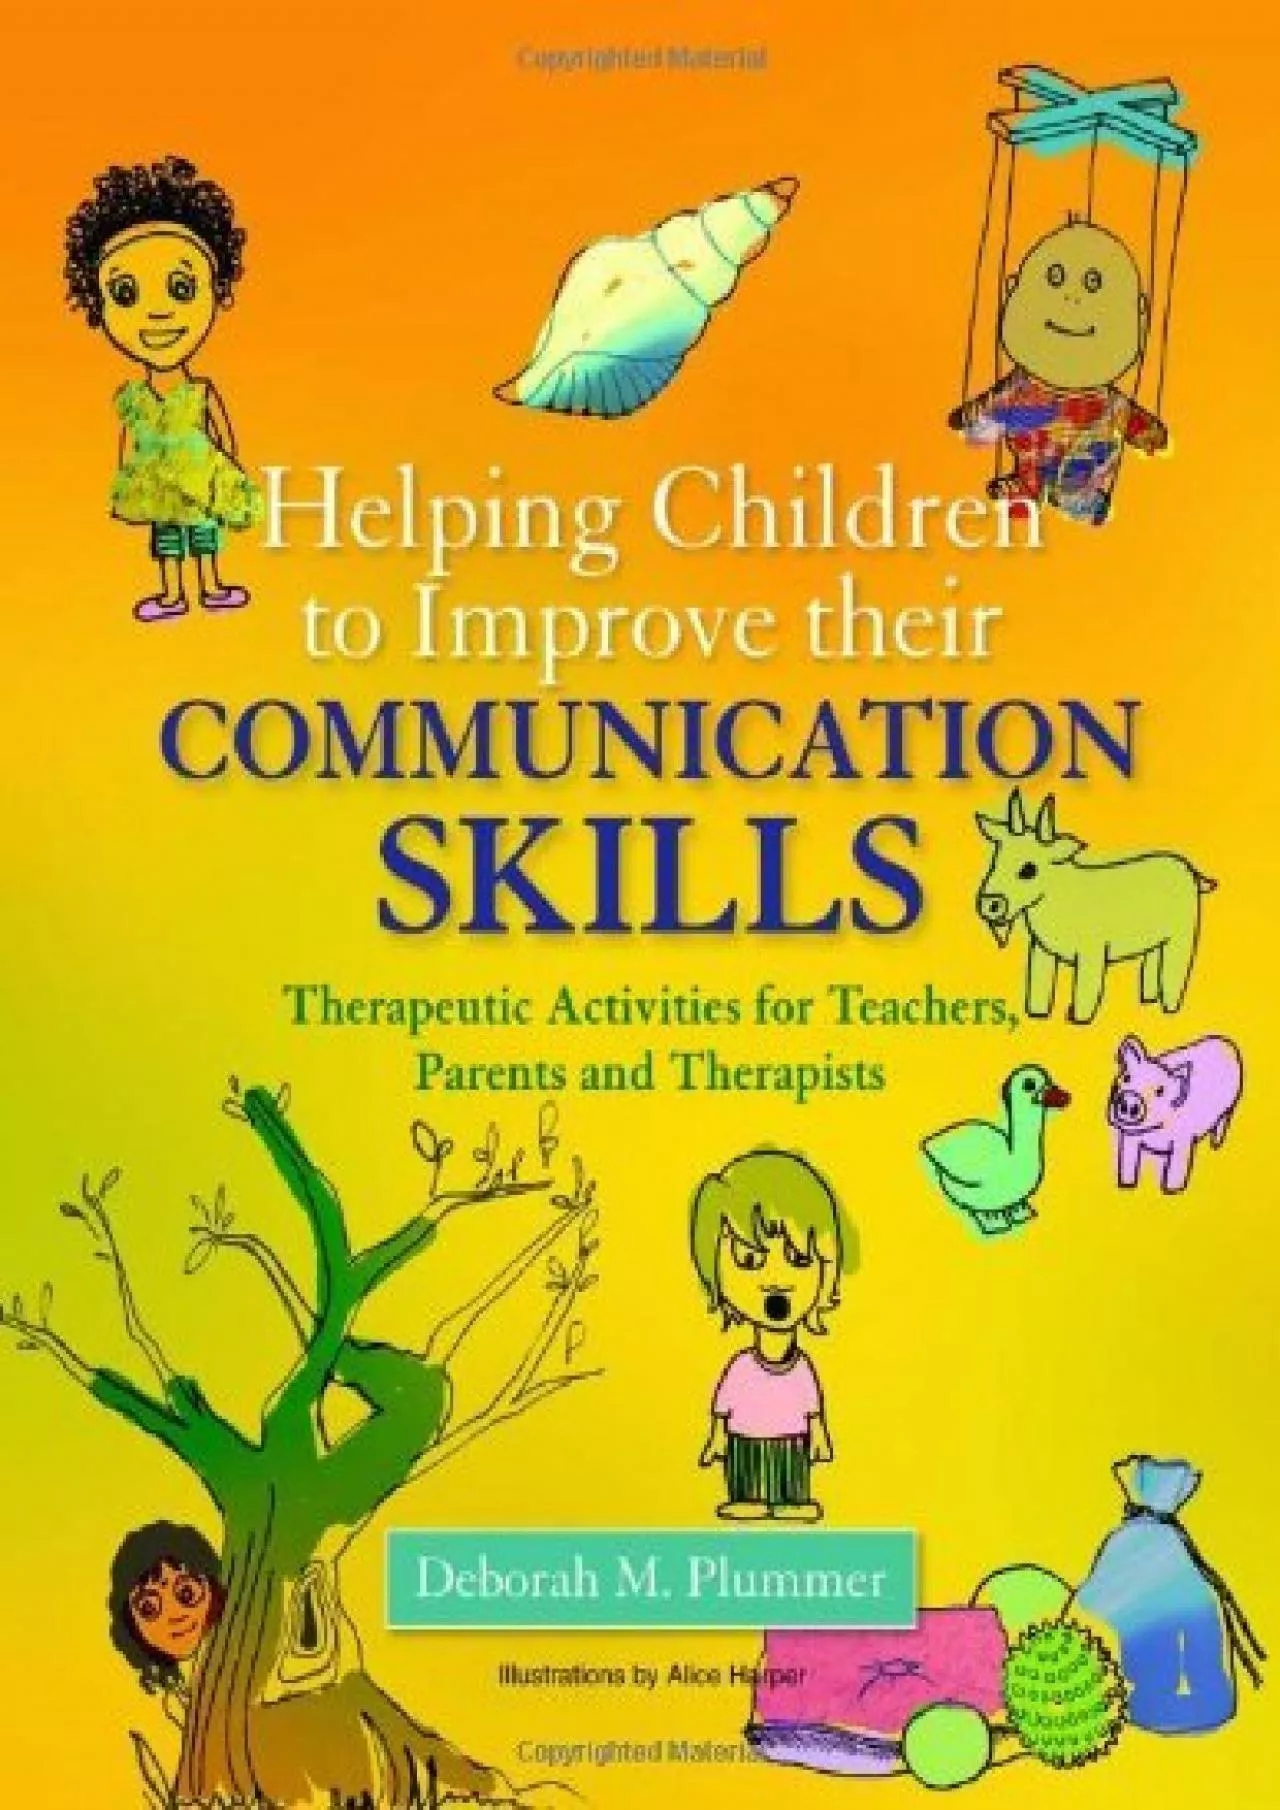 (BOOK)-Helping Children to Improve their Communication Skills: Therapeutic Activities